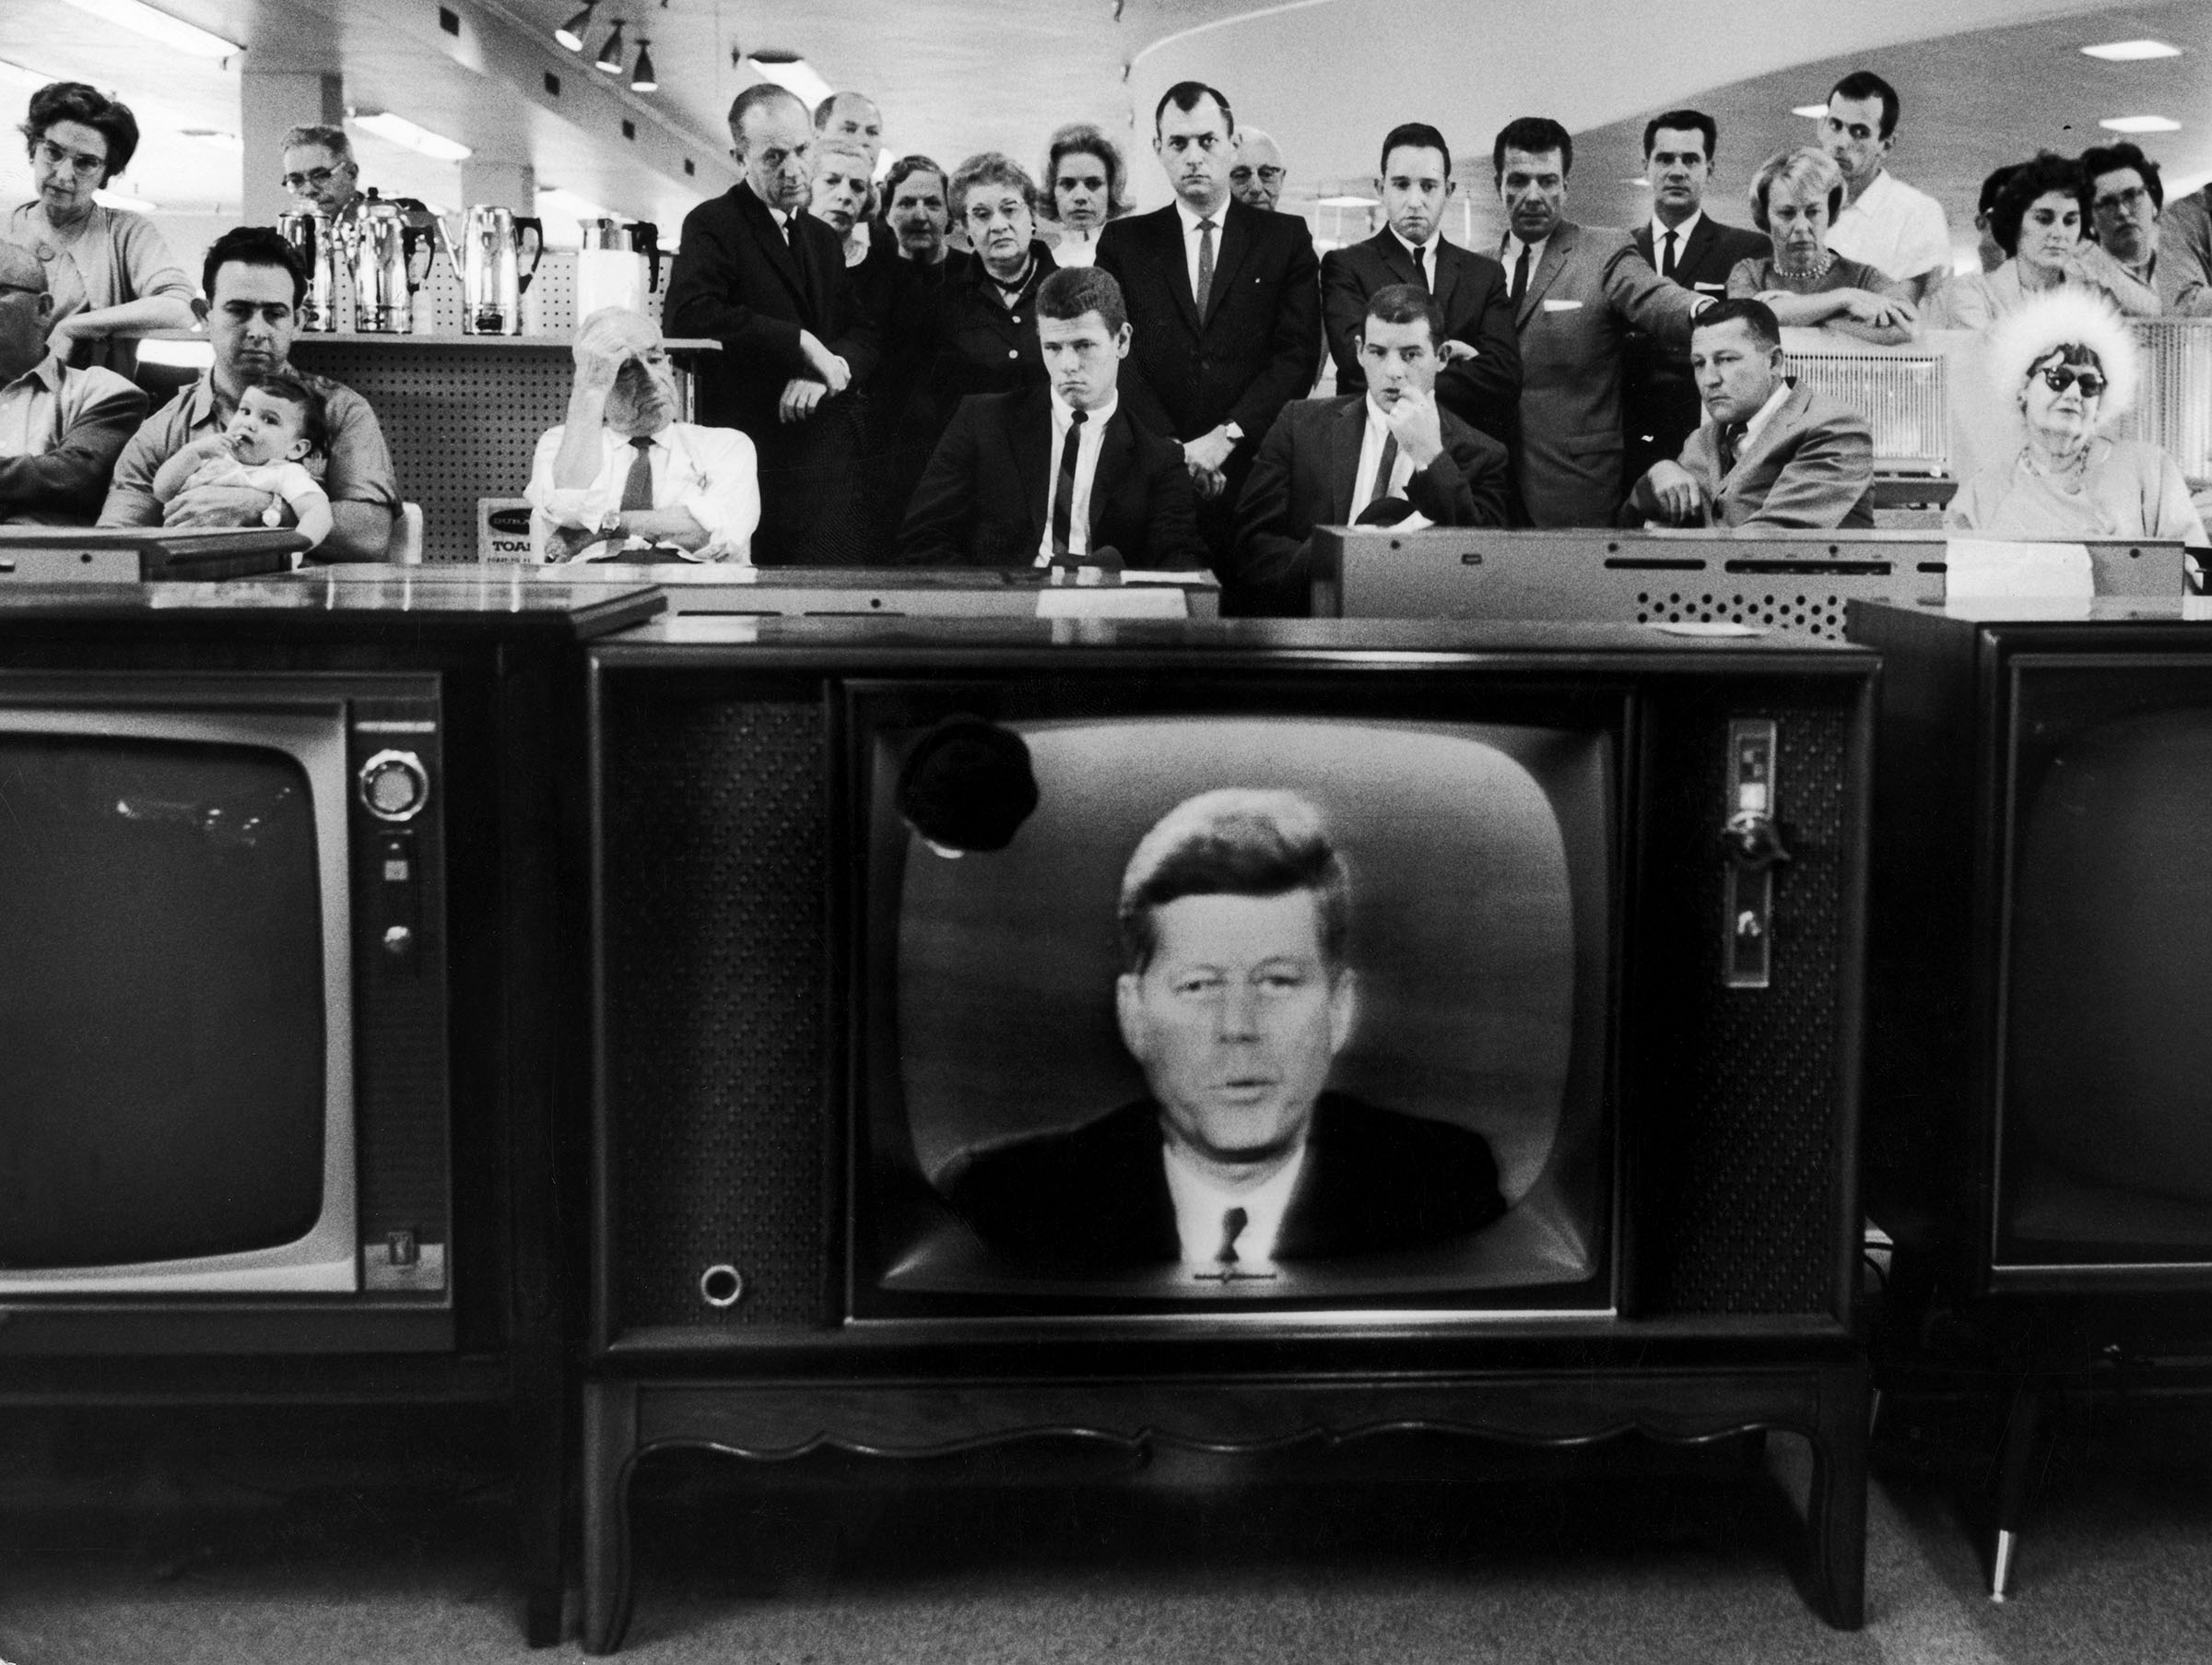 People watching President John F. Kennedy's TV announcement of Cuban blockade during the missile crisis in a department store in California on Oct.22, 1962. (Ralph Crane—Life Magazine/The LIFE Picture Collection/Getty Images.)